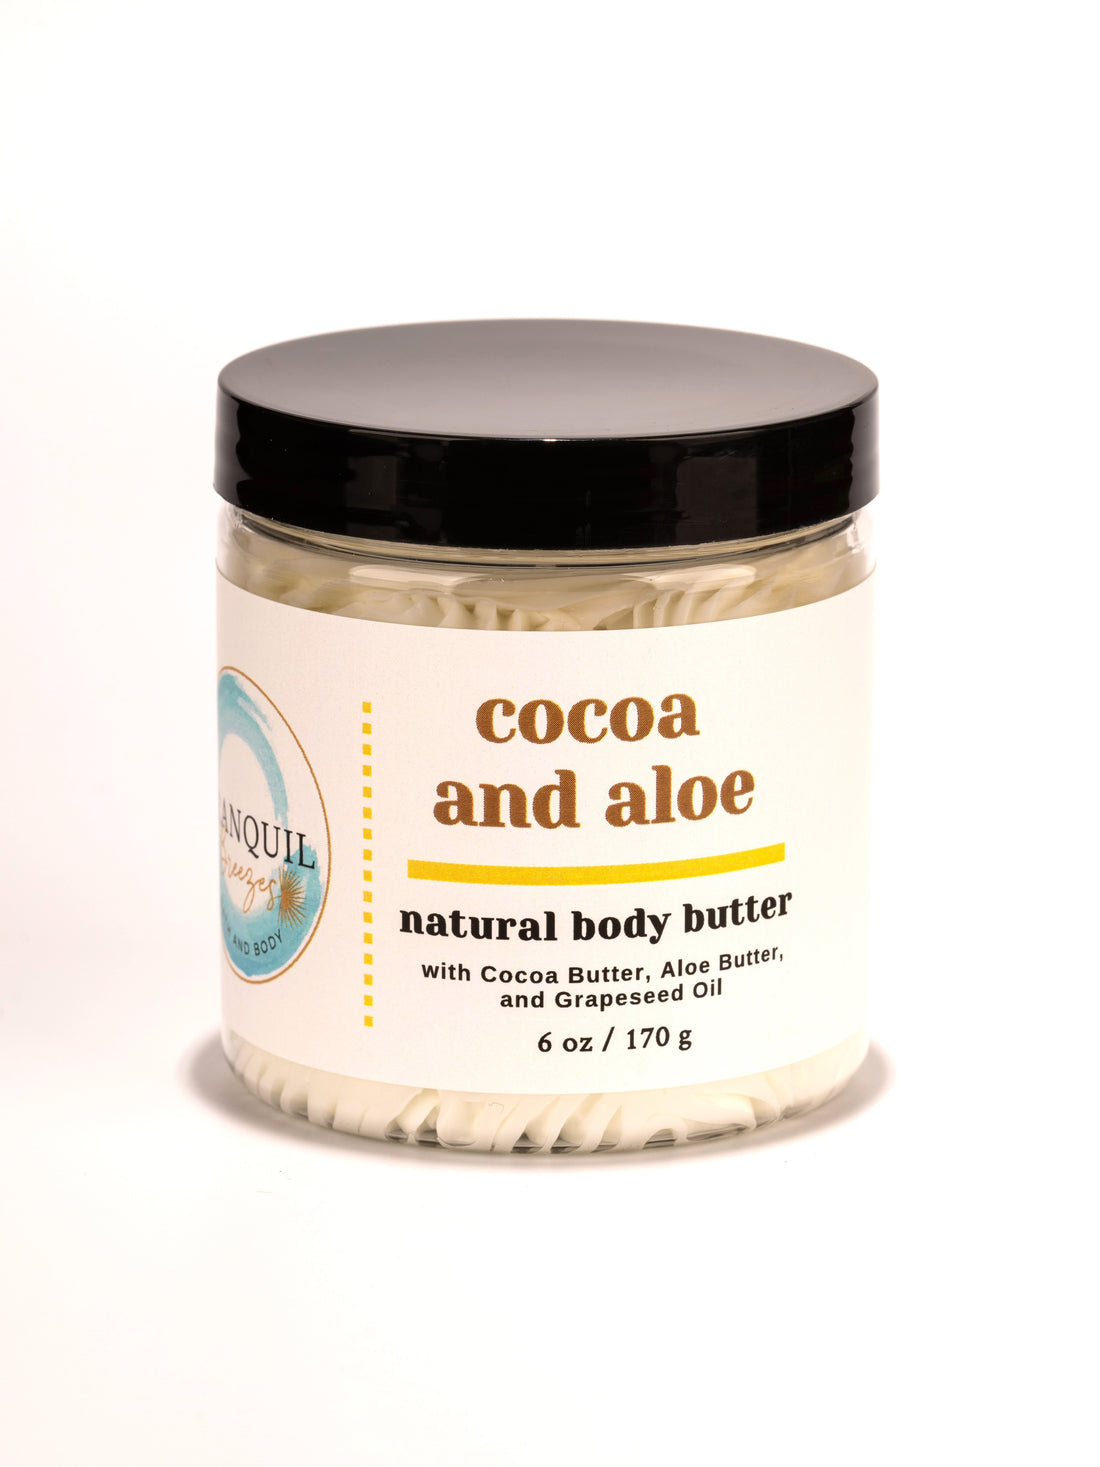 Cocoa and Aloe Natural Body Butter